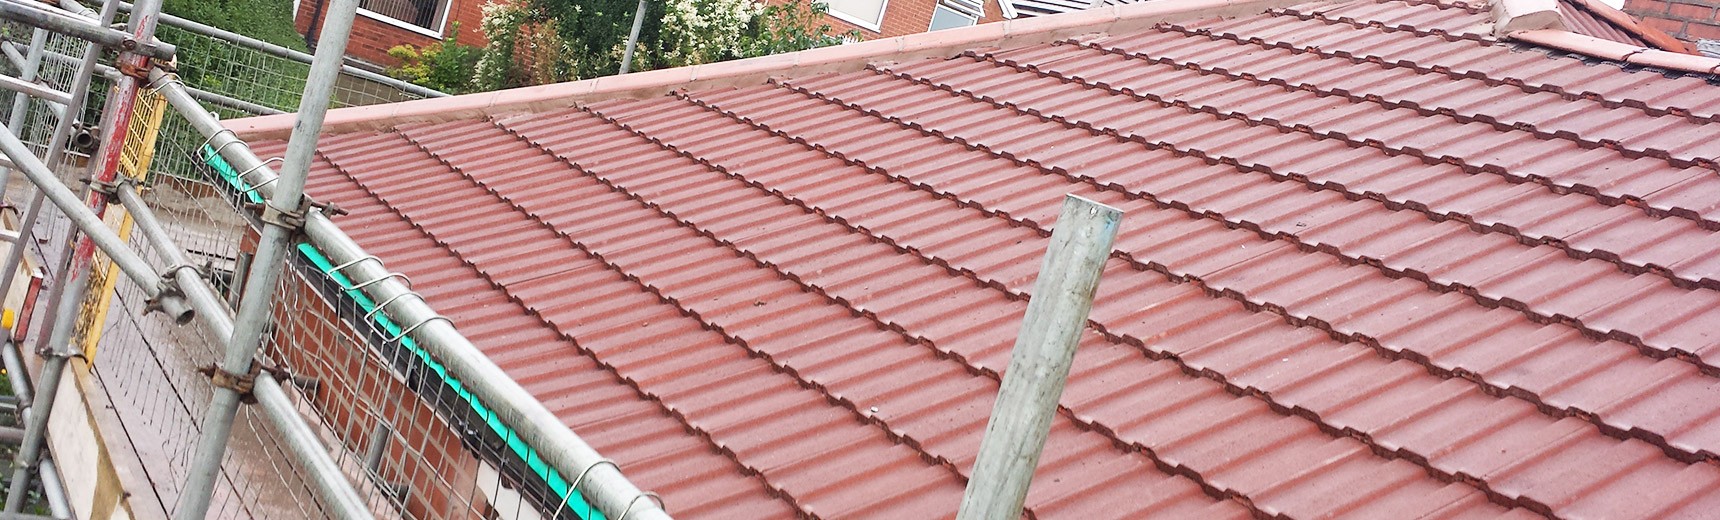 Roofer constructing a tiled roof